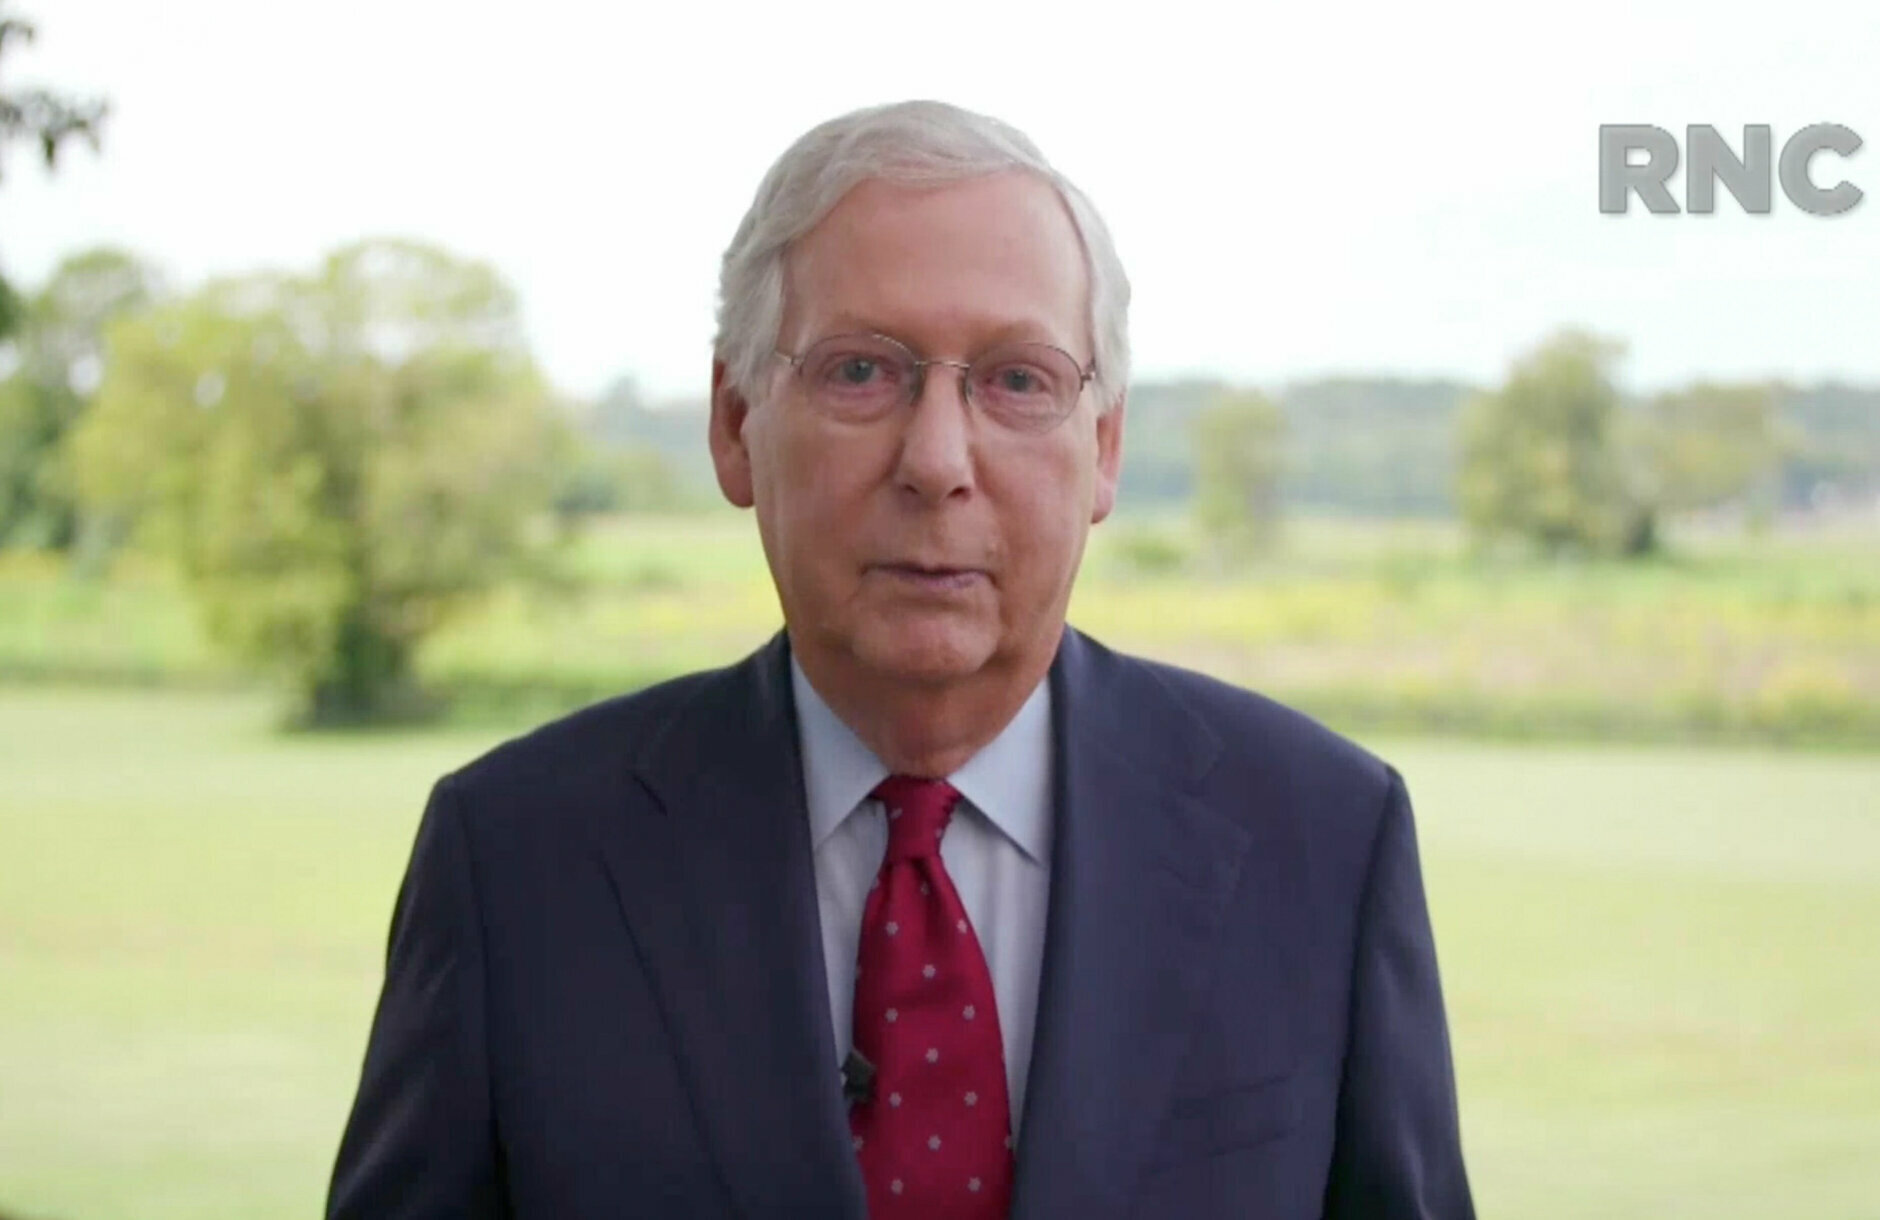 CHARLOTTE, NC - AUGUST 27: (EDITORIAL USE ONLY) In this screenshot from the RNC’s livestream of the 2020 Republican National Convention, U.S. Senate Majority Leader Mitch McConnell (R-KY) addresses the virtual convention on August 27, 2020. The convention is being held virtually due to the coronavirus pandemic but will include speeches from various locations including Charlotte, North Carolina and Washington, DC. (Photo Courtesy of the Committee on Arrangements for the 2020 Republican National Committee via Getty Images)